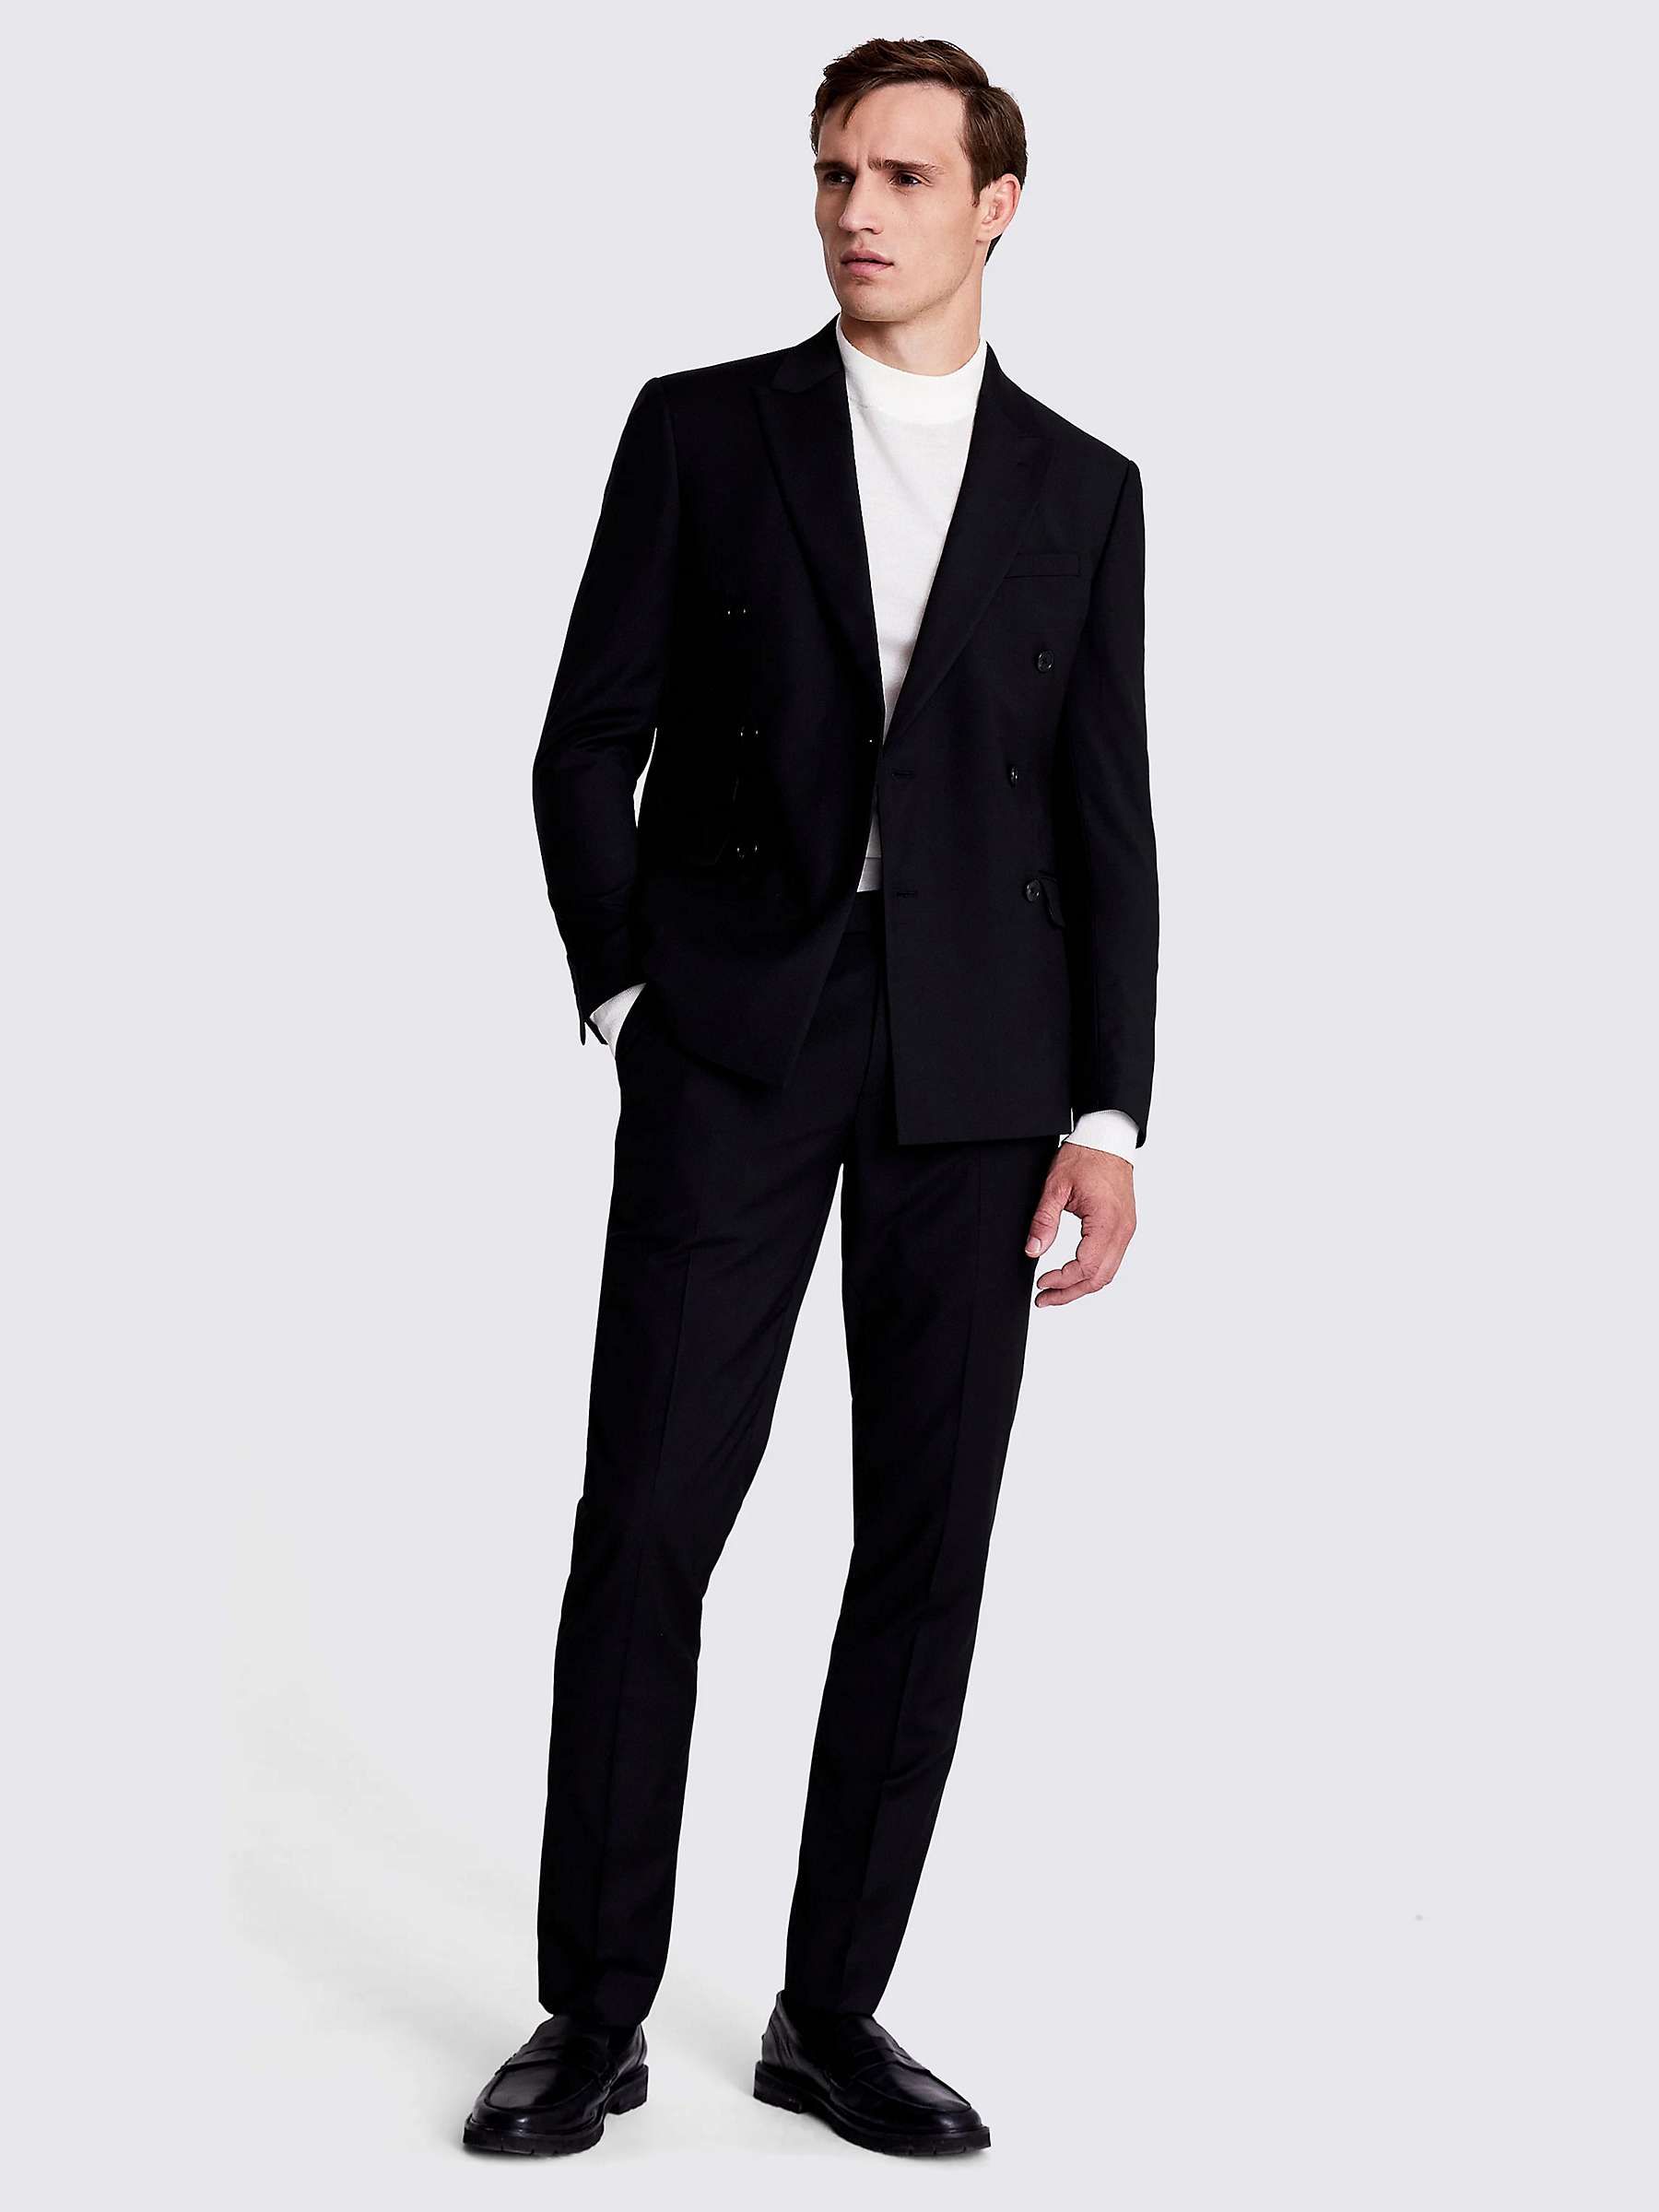 Buy Moss Slim Fit Double Breasted Stretch Jacket Online at johnlewis.com